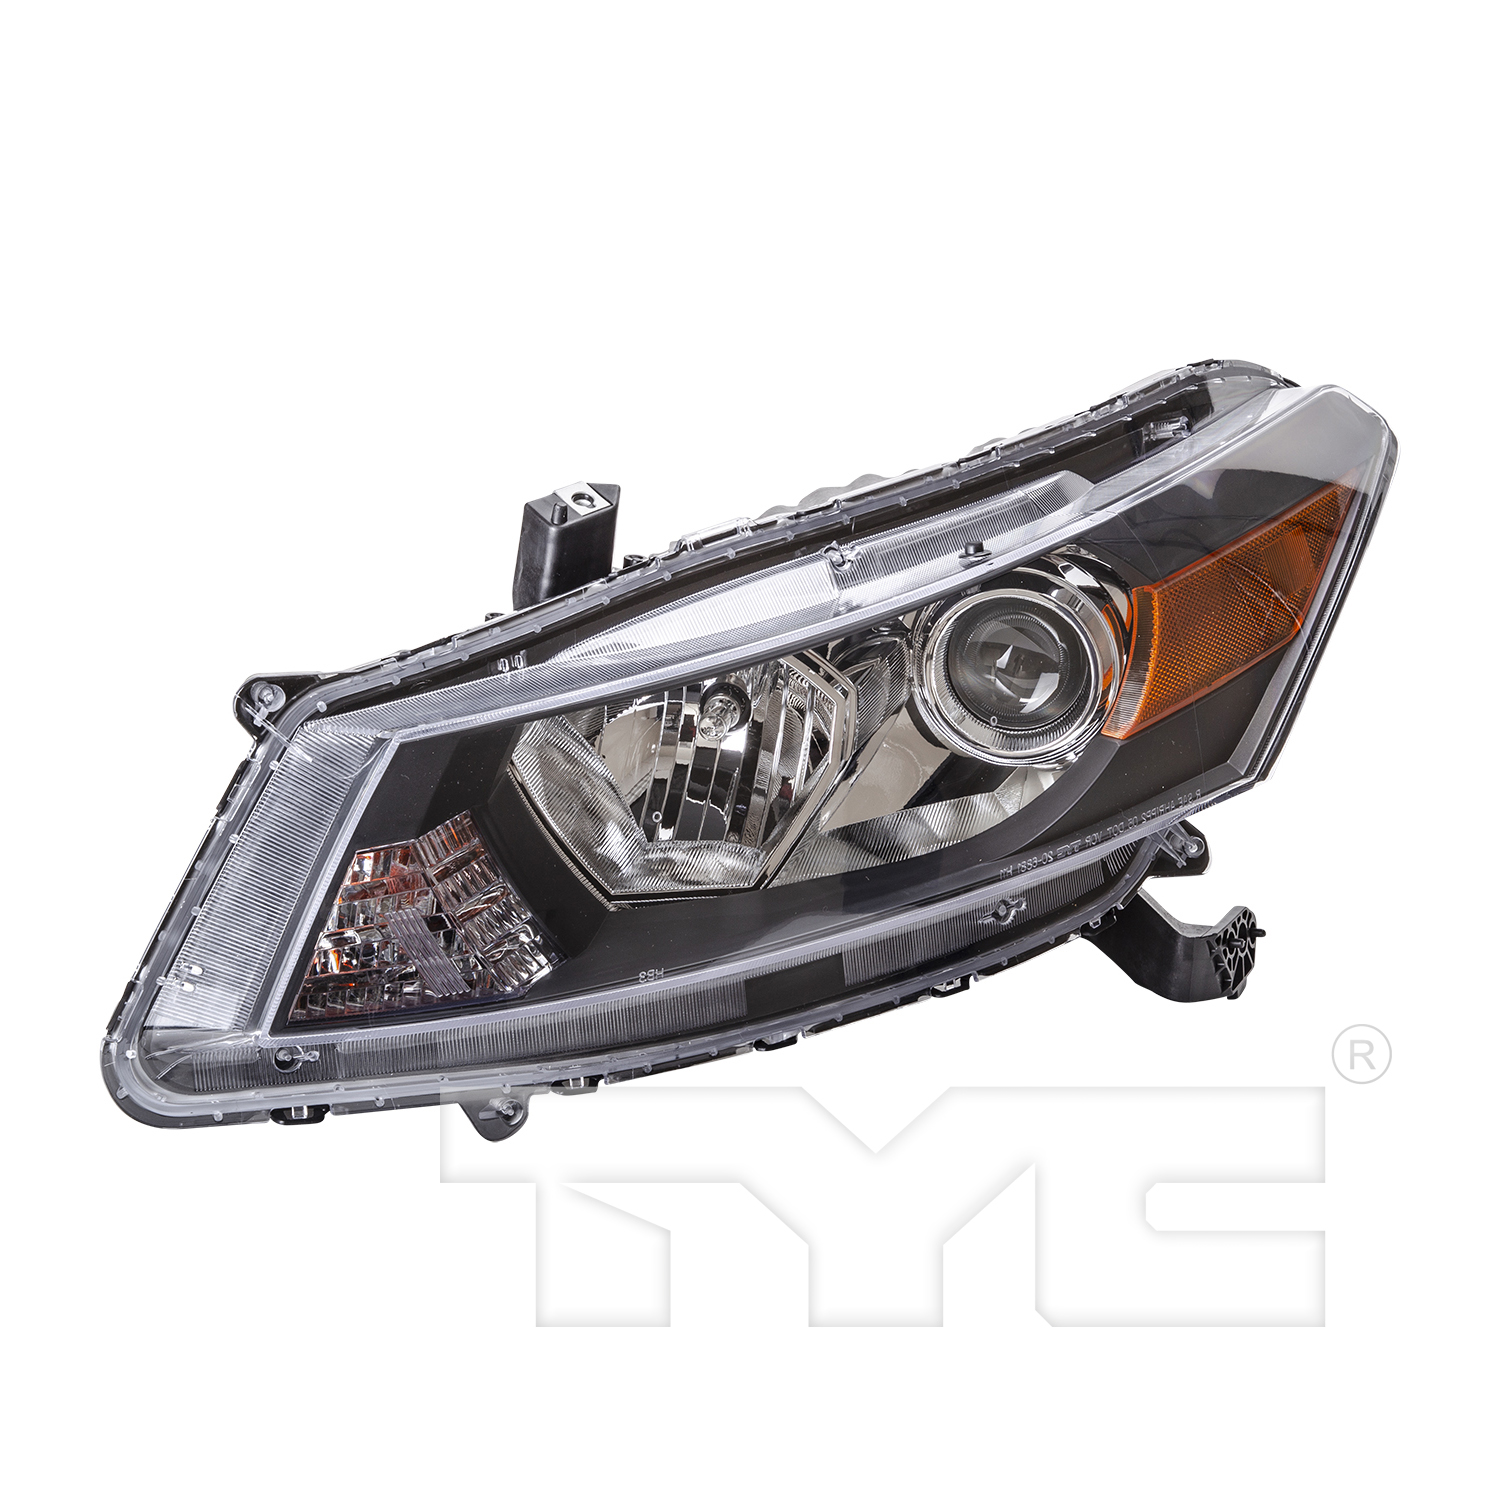 Aftermarket HEADLIGHTS for HONDA - ACCORD, ACCORD,08-10,LT Headlamp assy composite